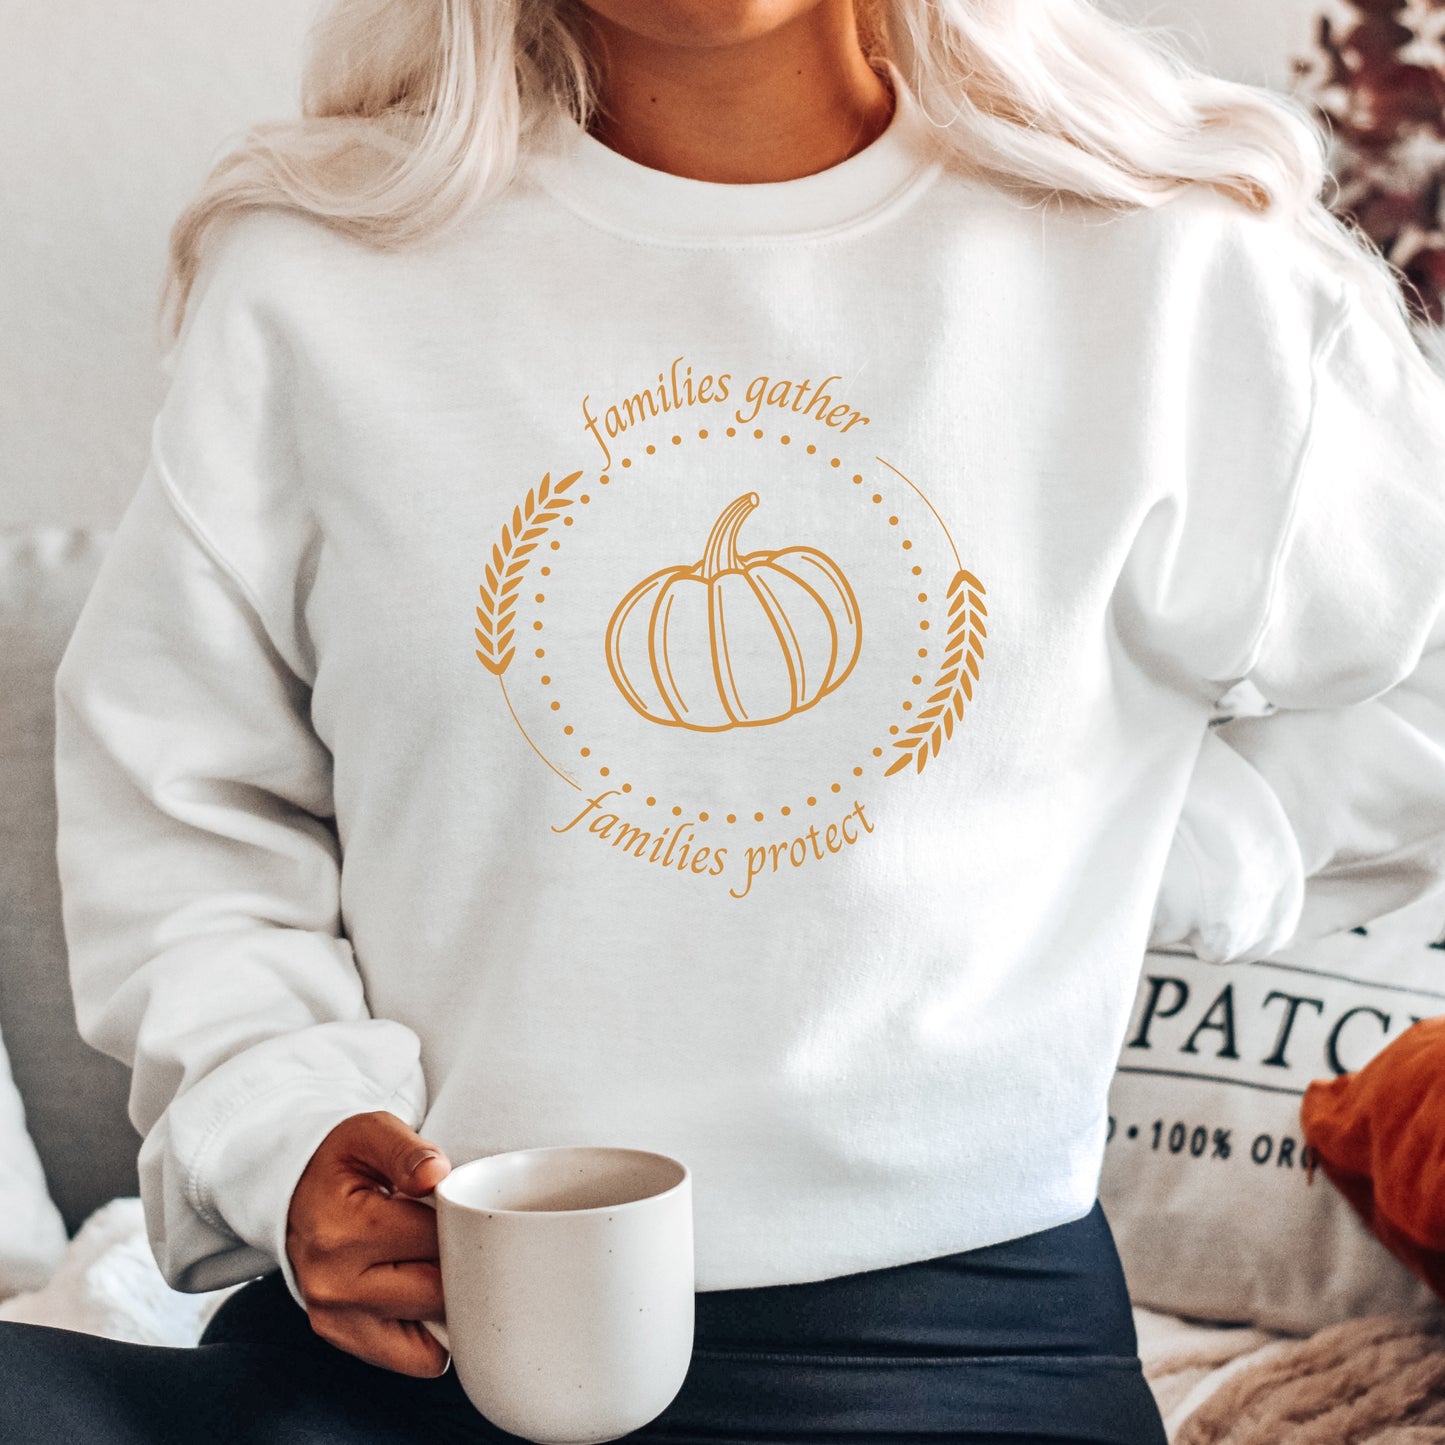 Adorned with a heartwarming autumn fall harvest pumpkin graphic and the inspiring message Families Gather, Families Protect, this crewneck sweatshirt stands as a testament to the unwavering support and protection families should offer to survivors.